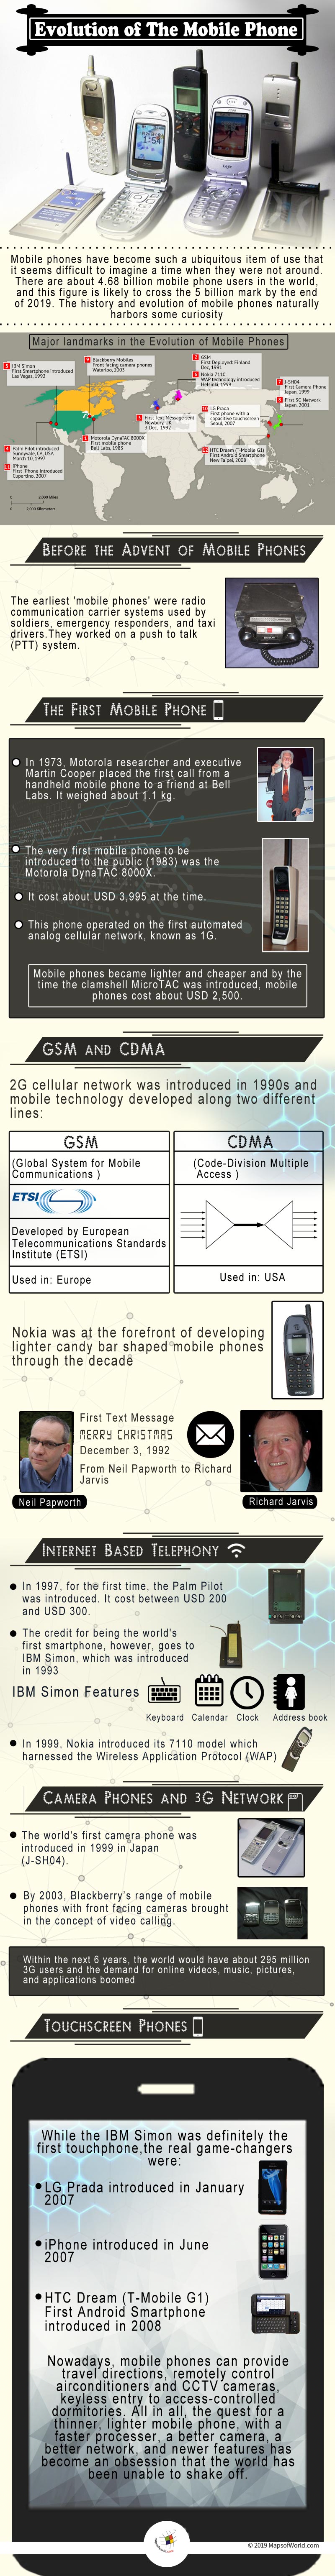 Infographic Giving Details on the Evolution of Mobile Phone